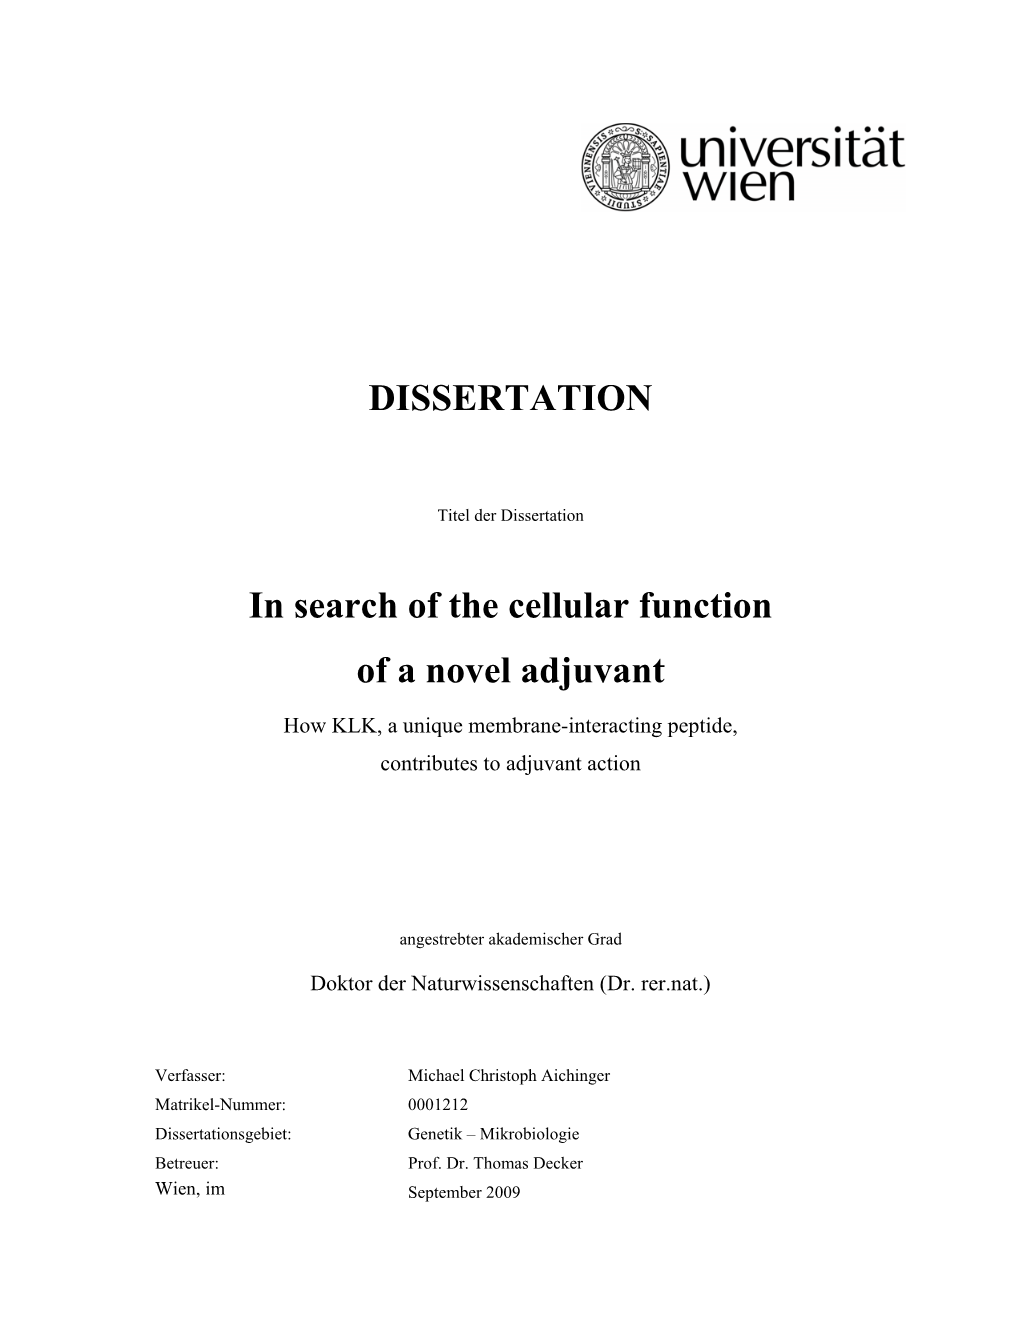 DISSERTATION in Search of the Cellular Function of a Novel Adjuvant